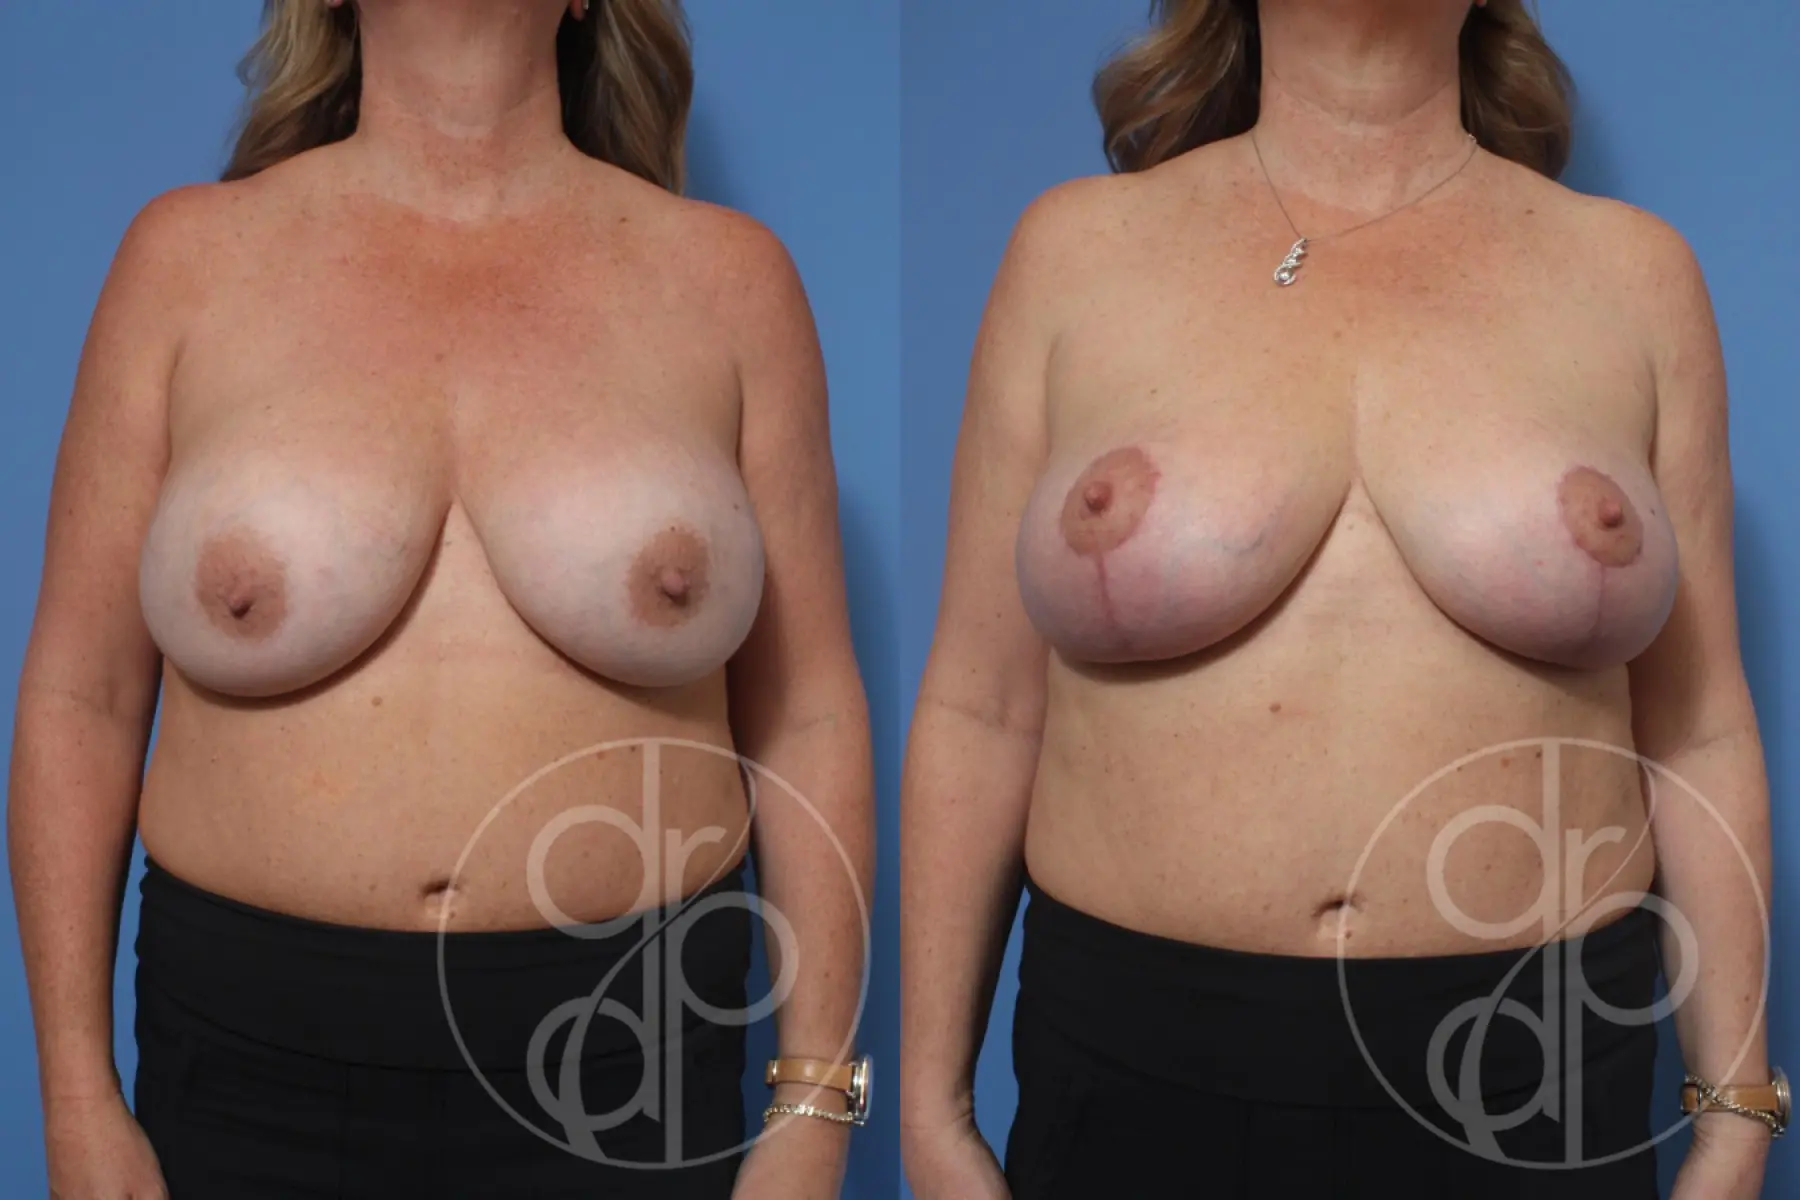 patient 10492 remove and replace breast implants before and after result - Before and After